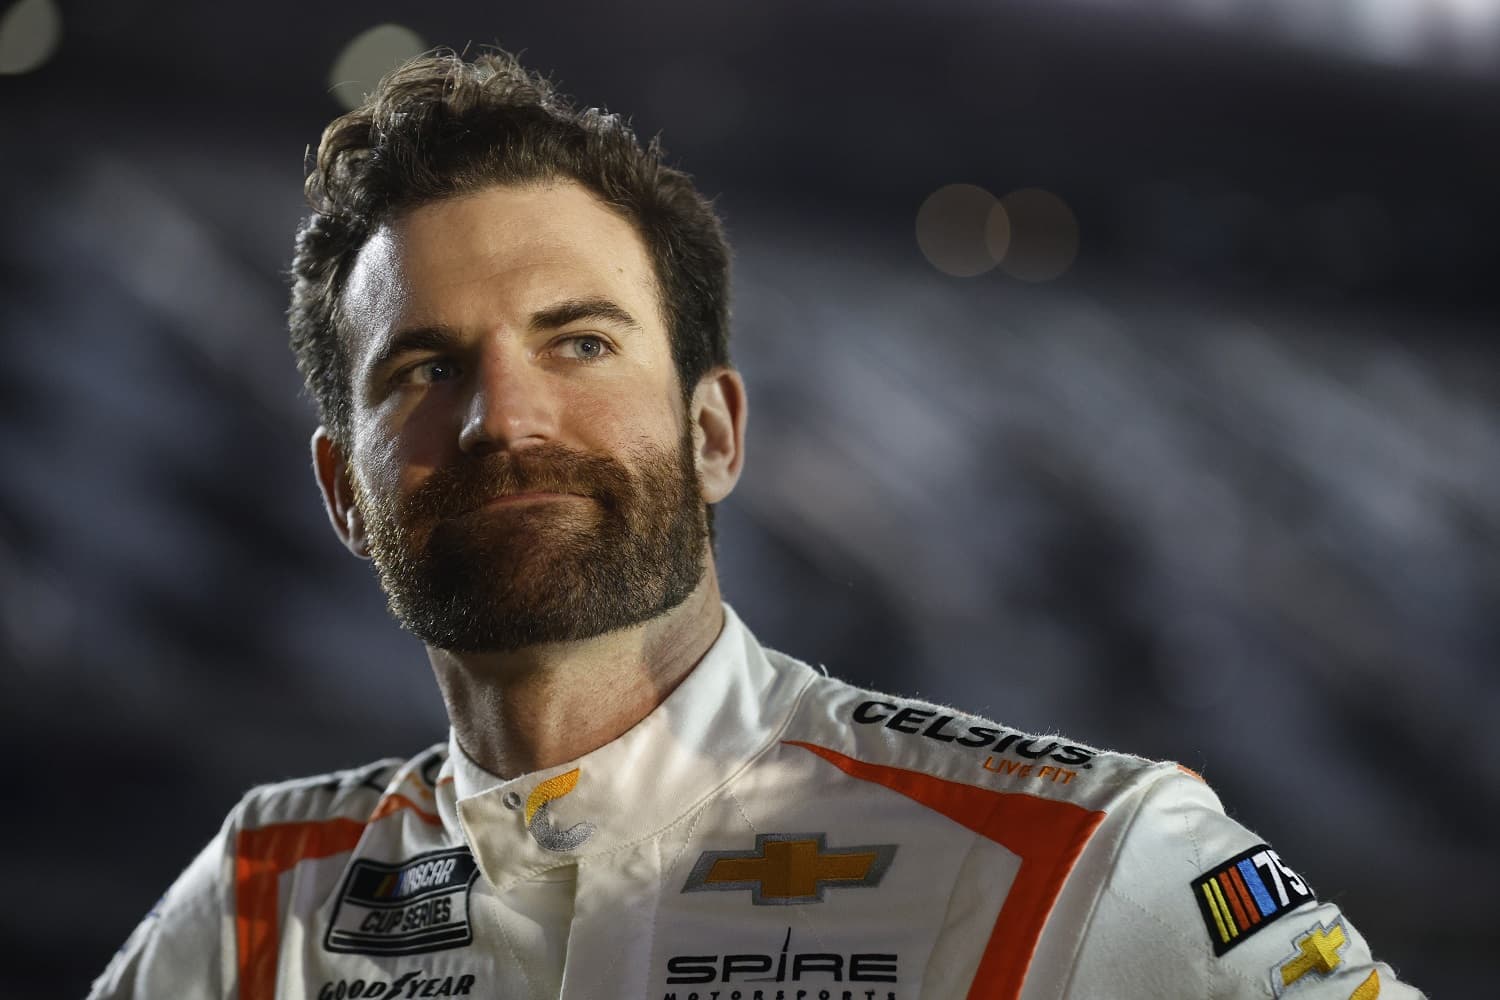 Corey LaJoie looks on during qualifying for the Busch Light Pole at Daytona International Speedway on Feb. 15, 2023. | Sean Gardner/Getty Images